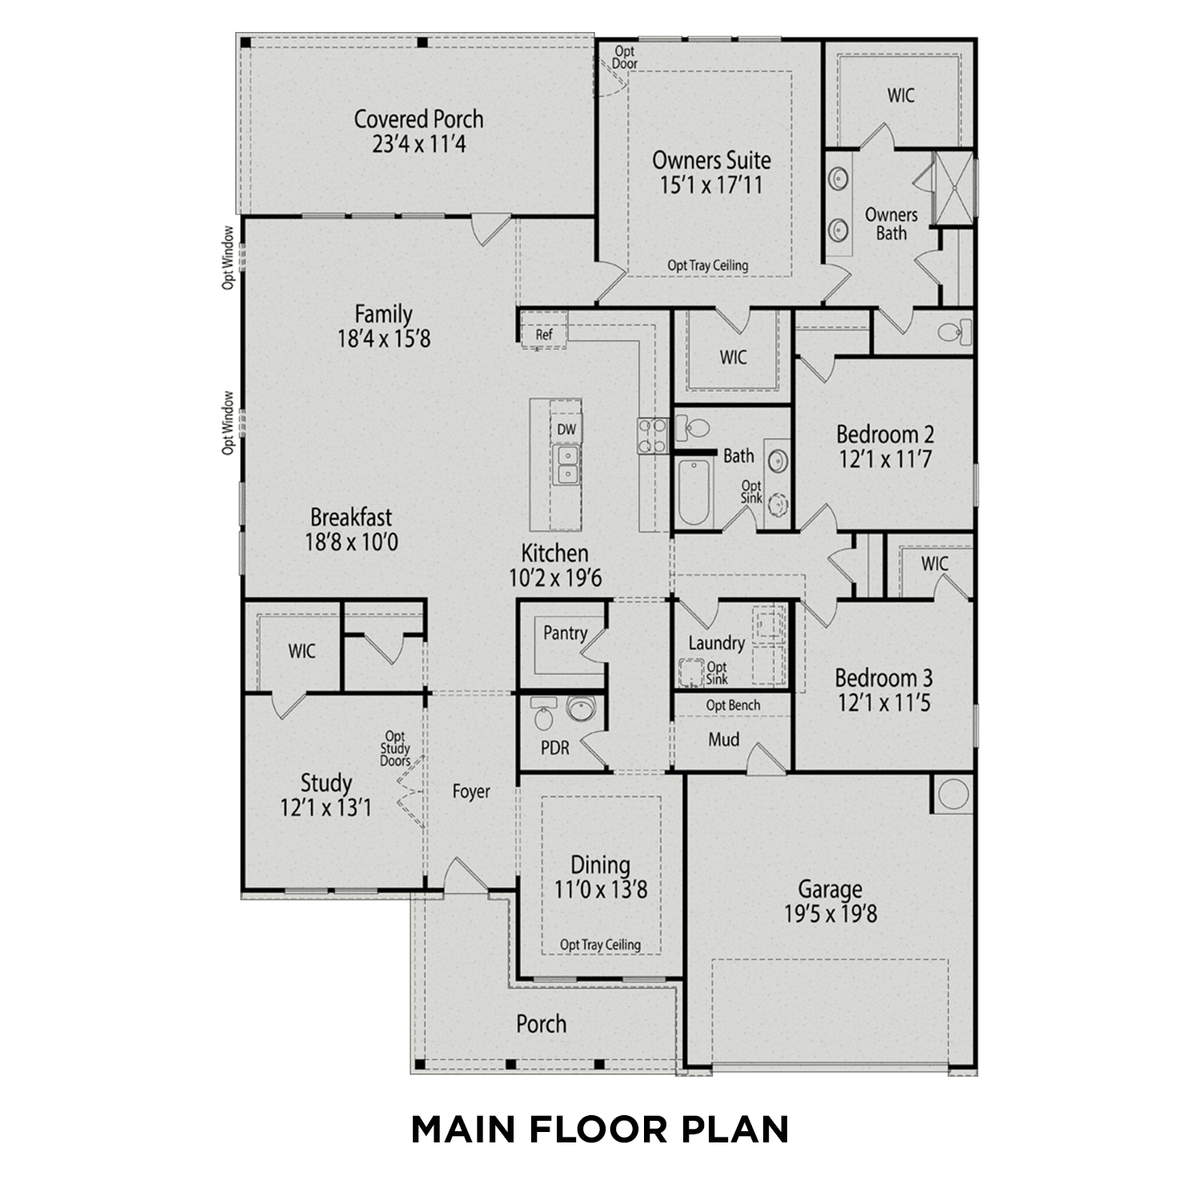 1 - The Magnolia A floor plan layout for 83 Golden Leaf Farms Road in Davidson Homes' Tobacco Road community.